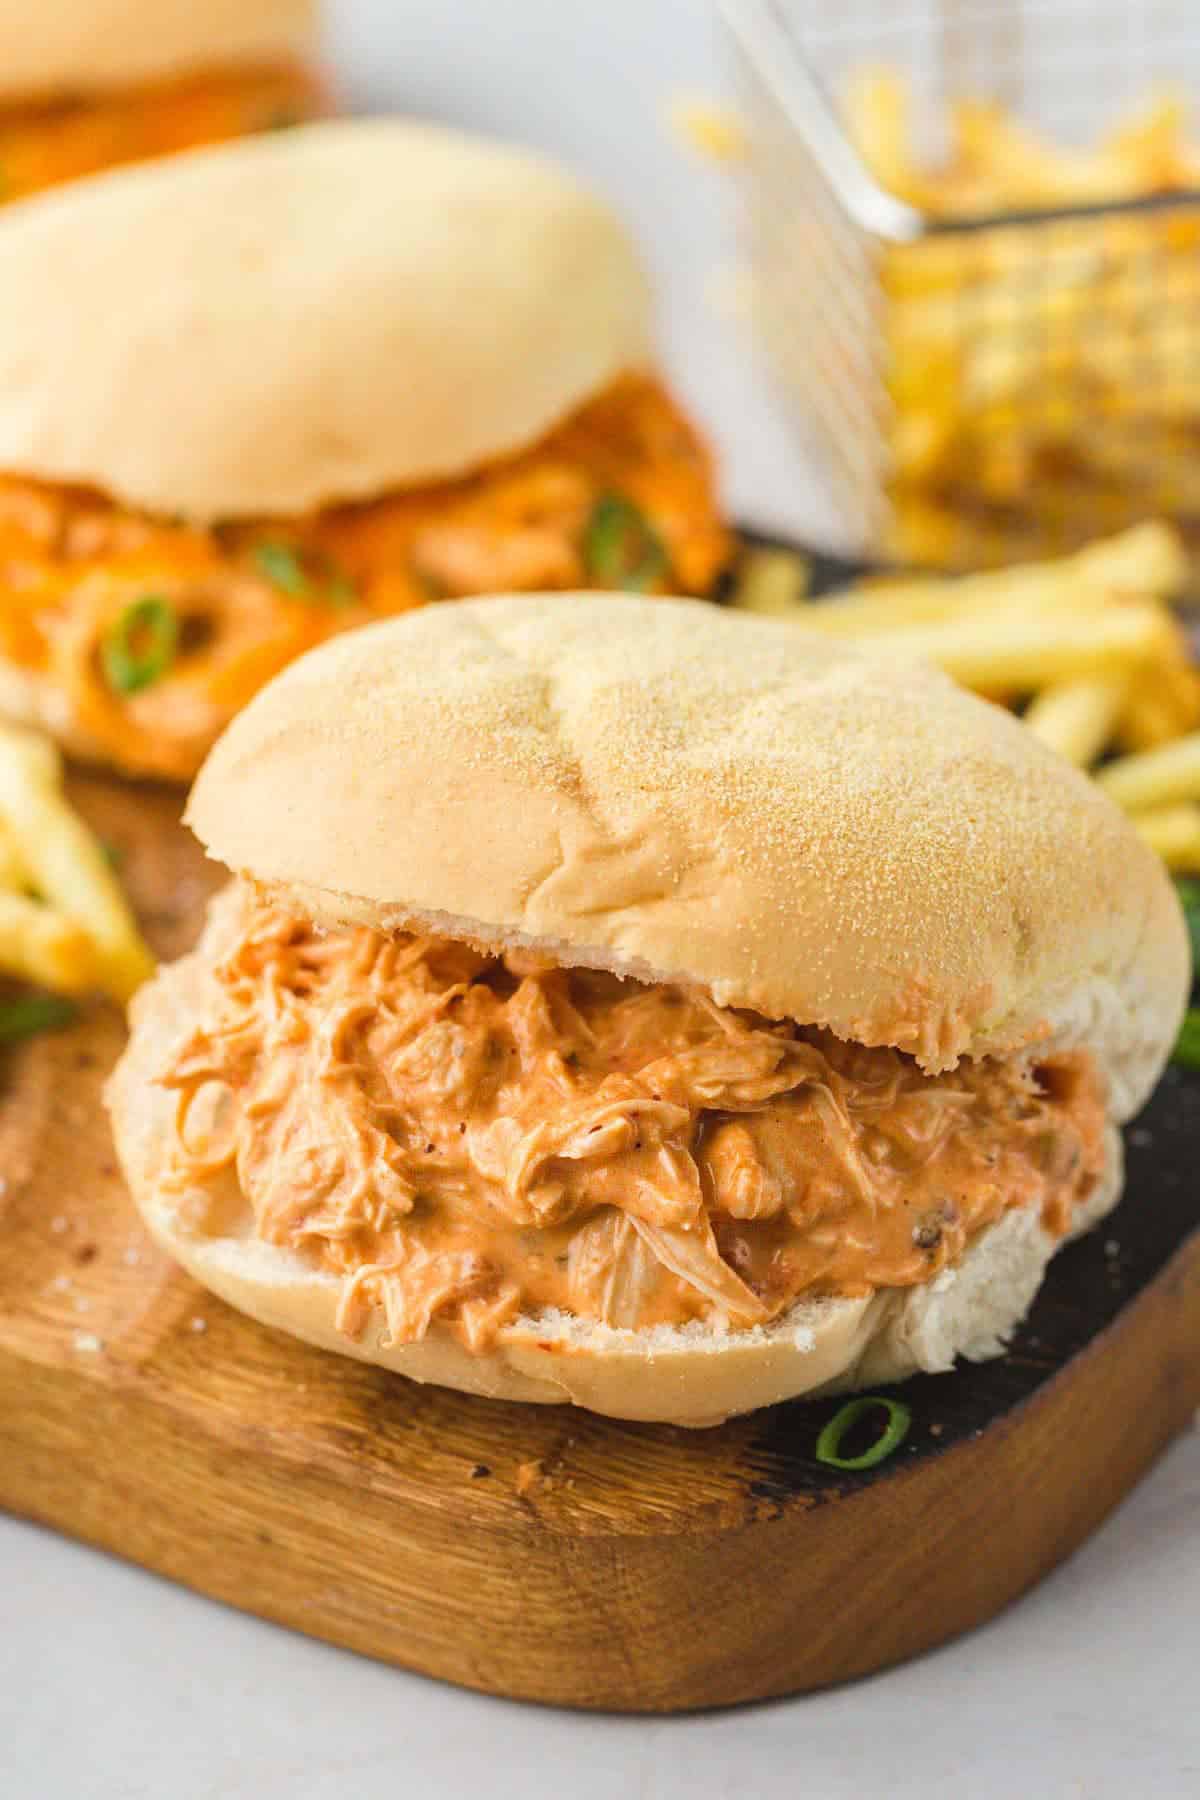 Creamy salsa shredded chicken sliders with French fries on a wooden board